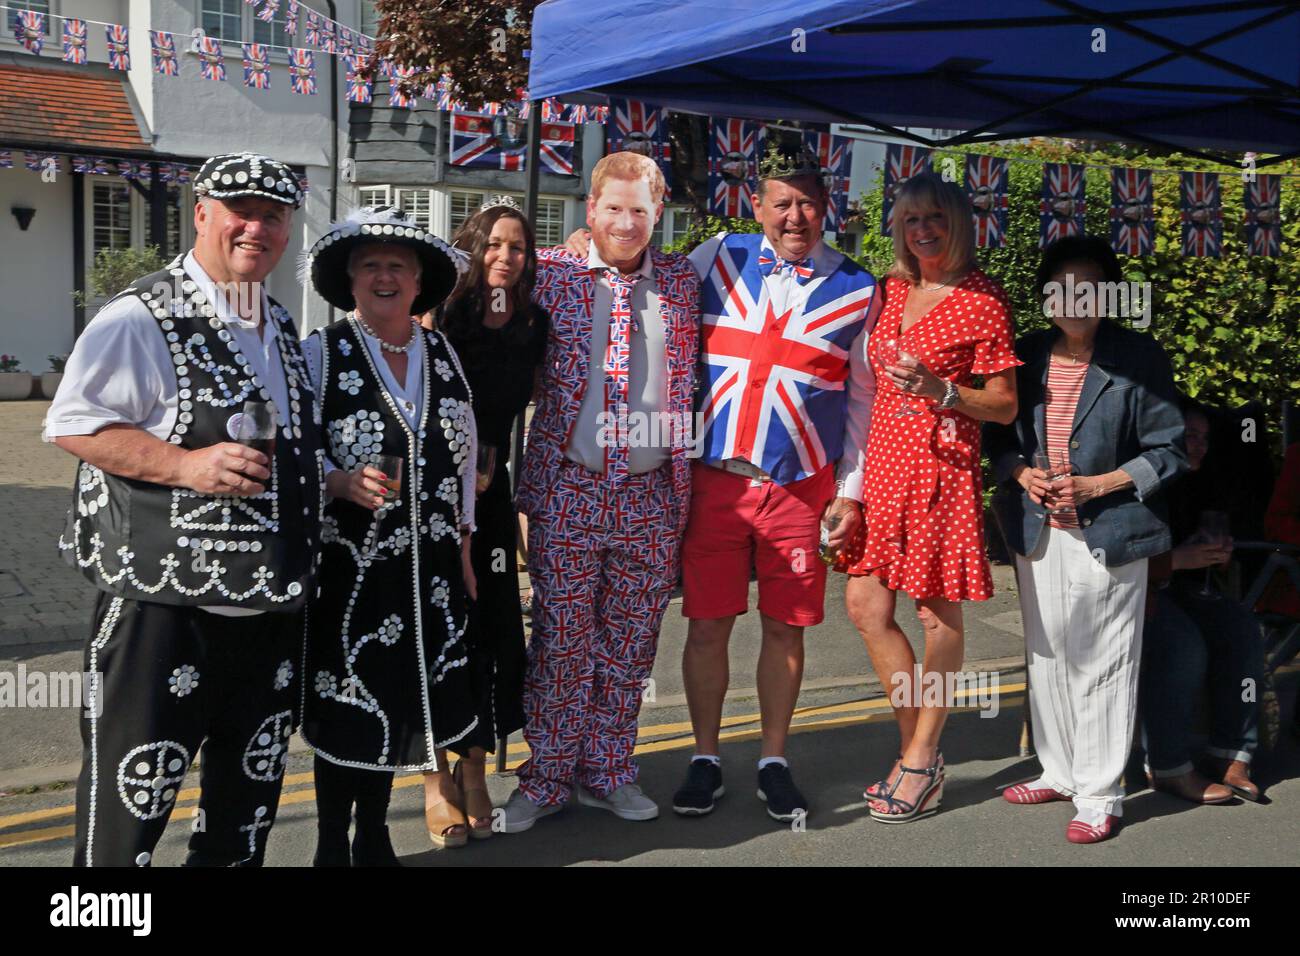 Portrait of Pearly King And Queen and People dressed as Prince Harry and Meghan at Street Party Celebrating King Charles III Coronation Surrey England Stock Photo